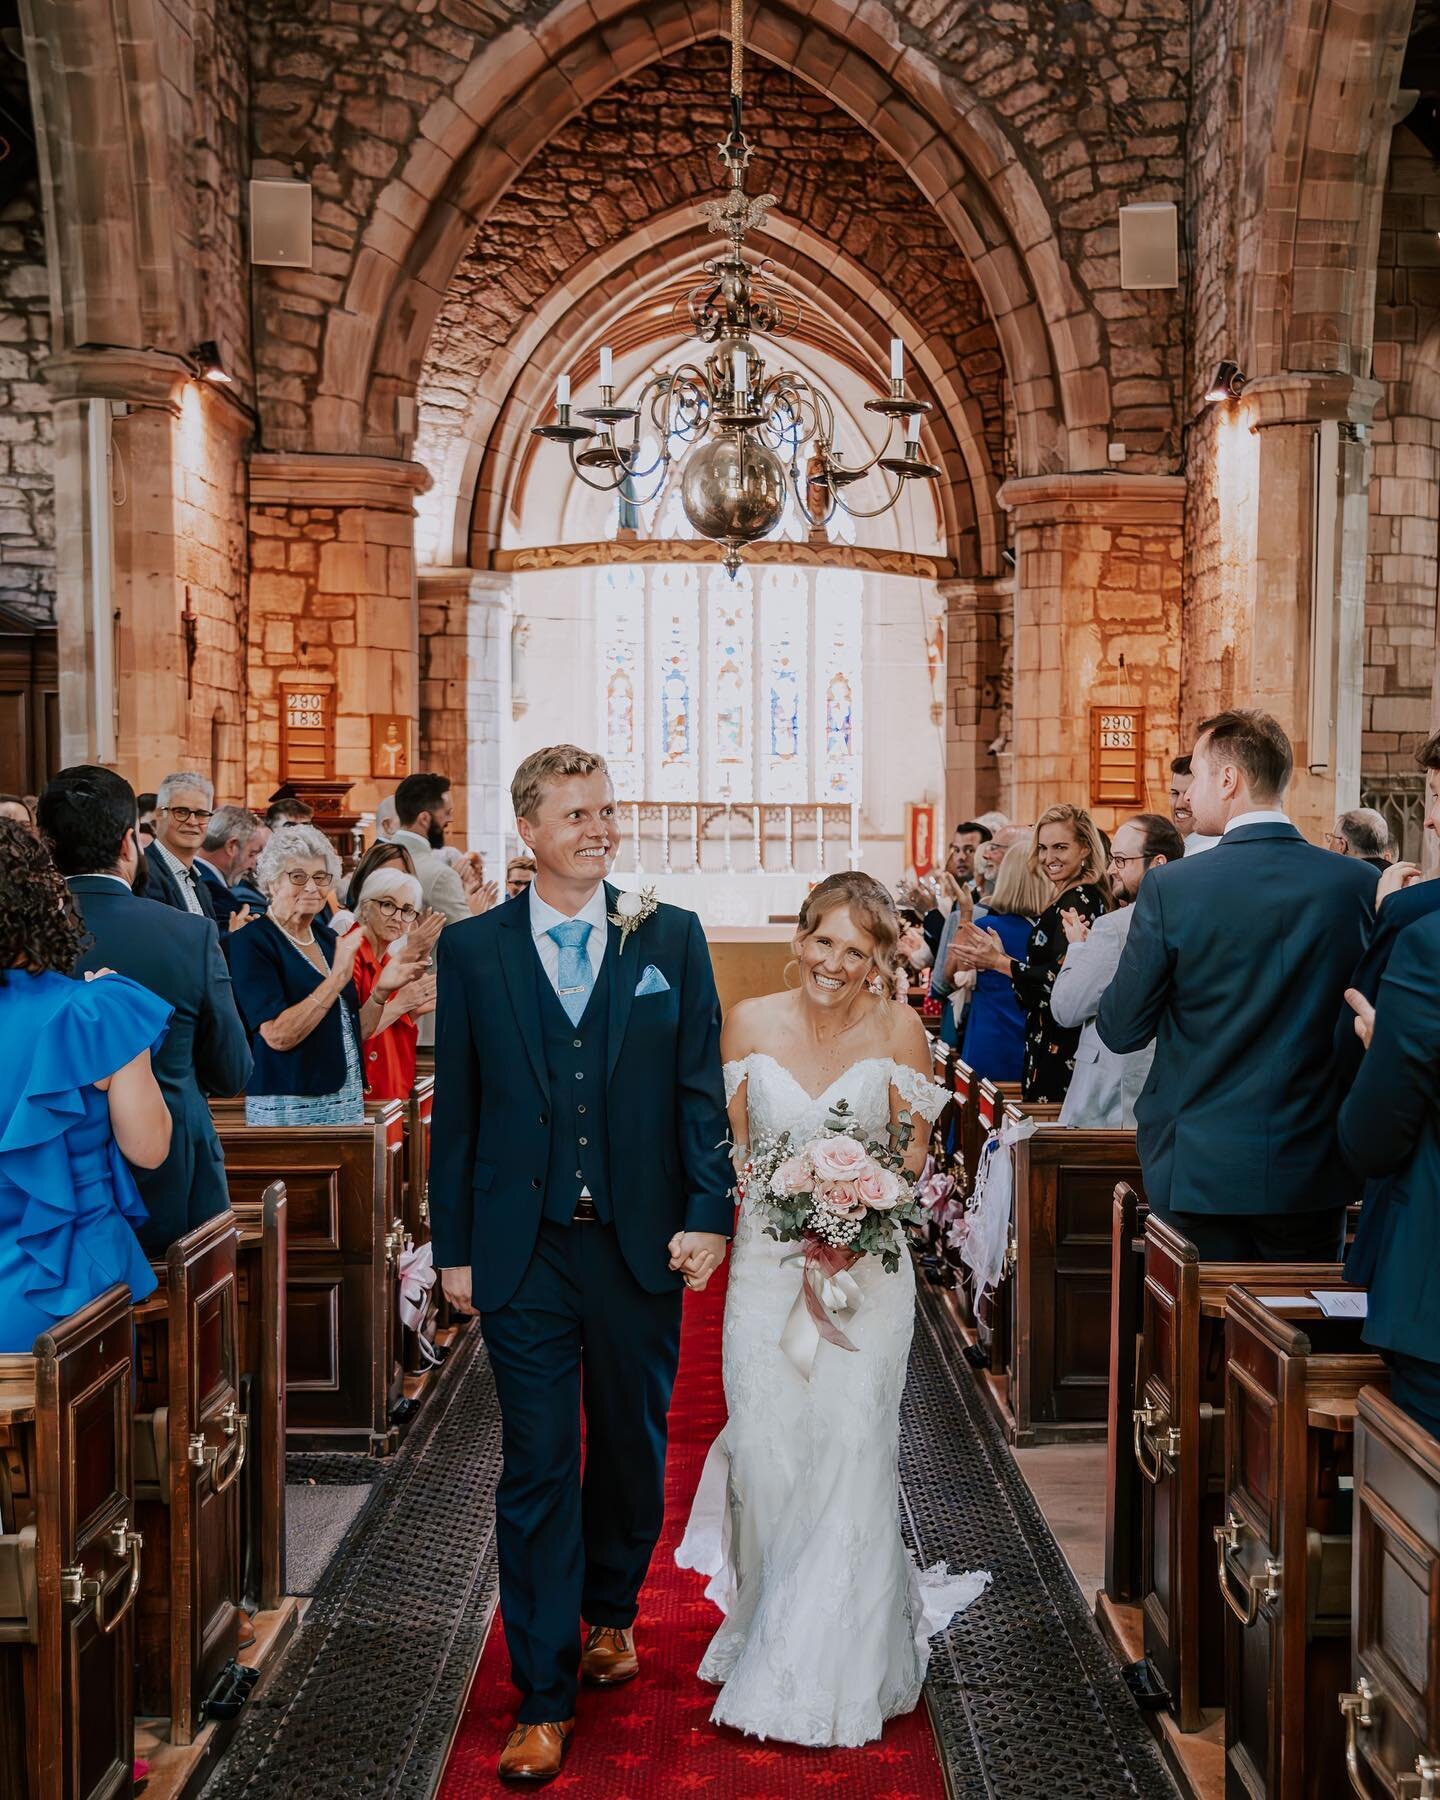 Congratulations James &amp; Sophie! Gorgeous wedding ceremony in St Alphege&rsquo;s Parish Church, Solihull 🤍 ⛪️ love a Church wedding!